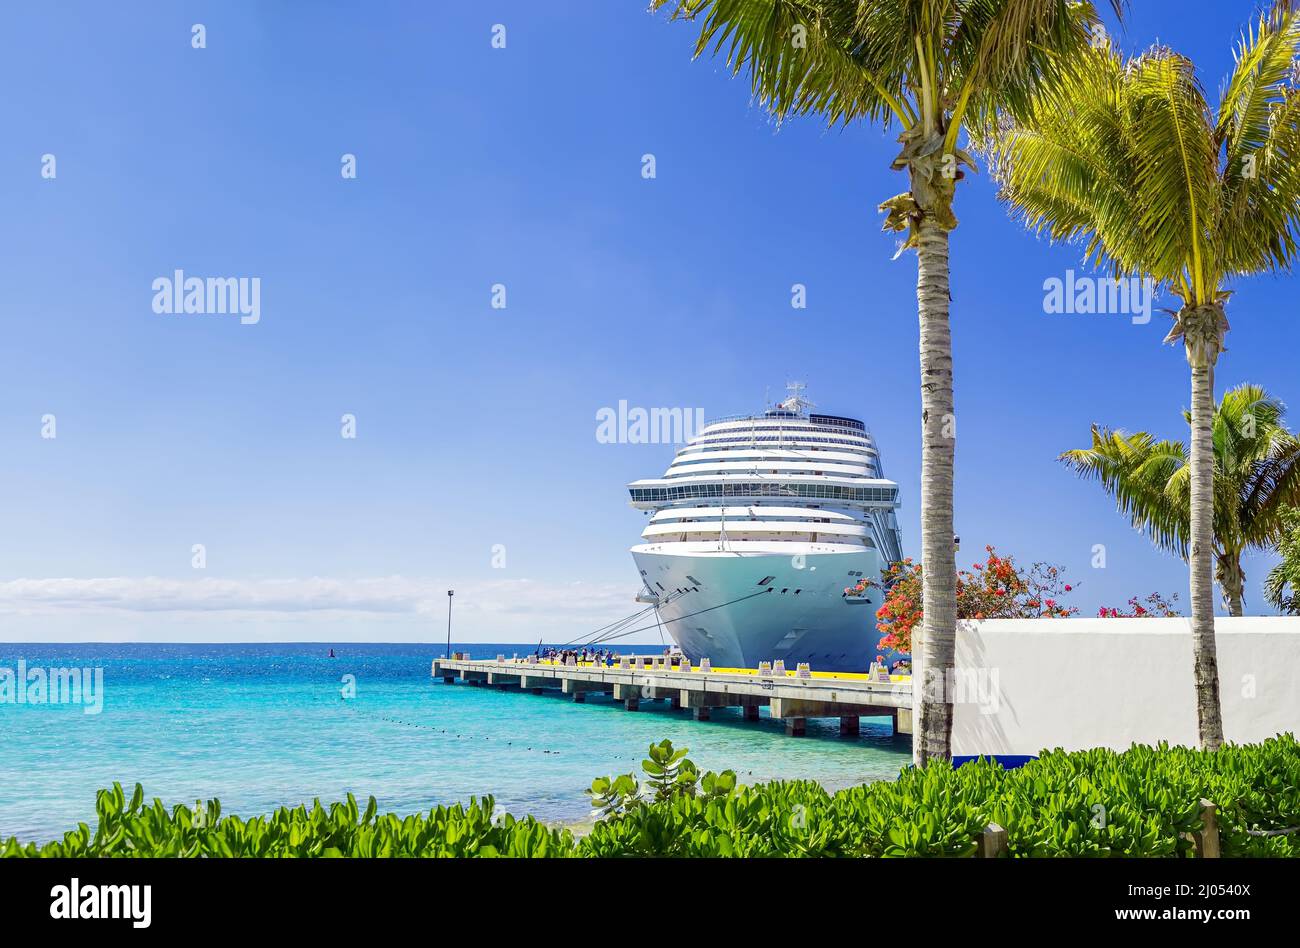 Cruise ship docked at tropical port on sunny day Stock Photo